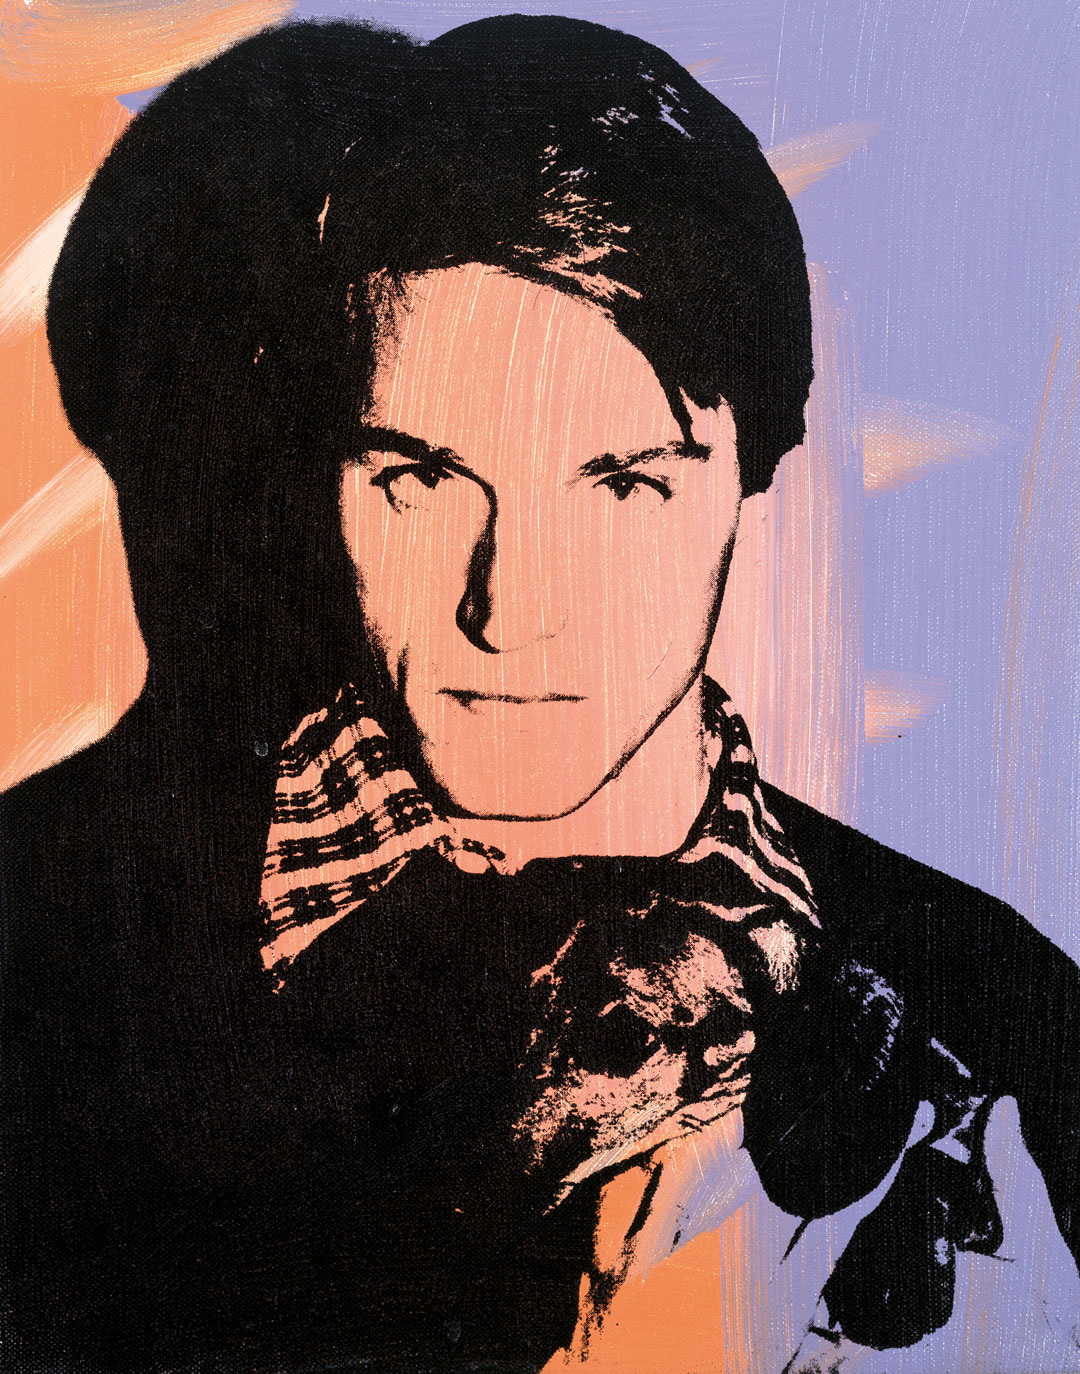 Andy Warhol, Jed Johnson, ca. 1978, acrylic and silkscreen ink on linen, 14 x 11 inches, 35.6 x 27.9 cm. Picture credit: The Andy Warhol Museum, Pittsburgh; Founding Collection, Contribution The Andy Warhol Foundation for the Visual Arts, Inc. © The Andy Warhol Foundation for the Visual Arts, Inc., NY, Photo by Kevin Ryan 